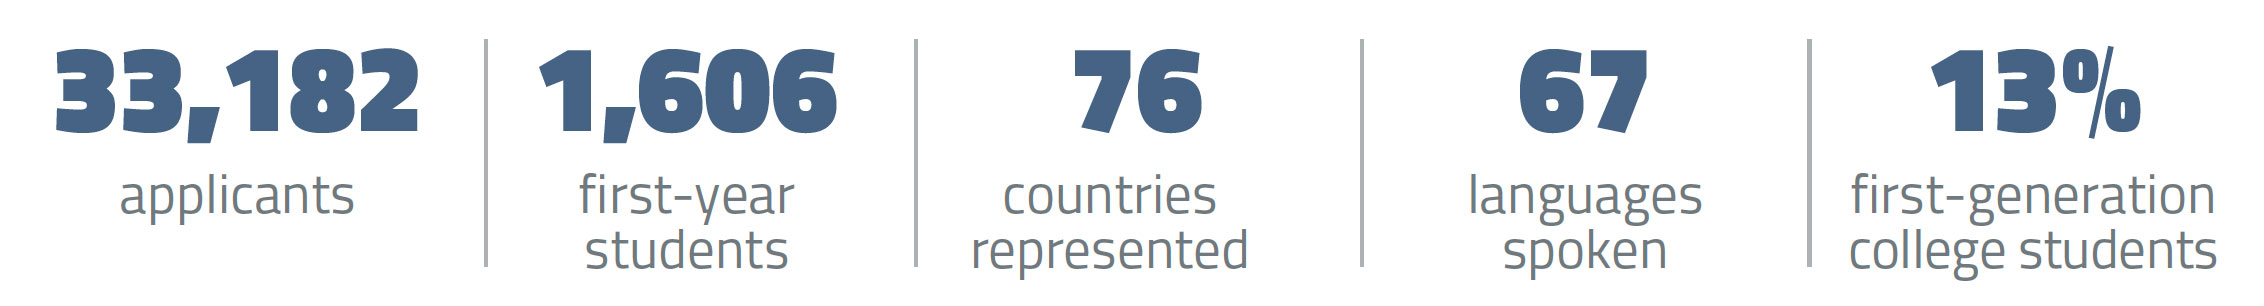 An infographic that reads: 33,182 applicants, 1,606 first-year
       students, 76 countries represented, 67 languages spoken, and 13% first-generation college students.